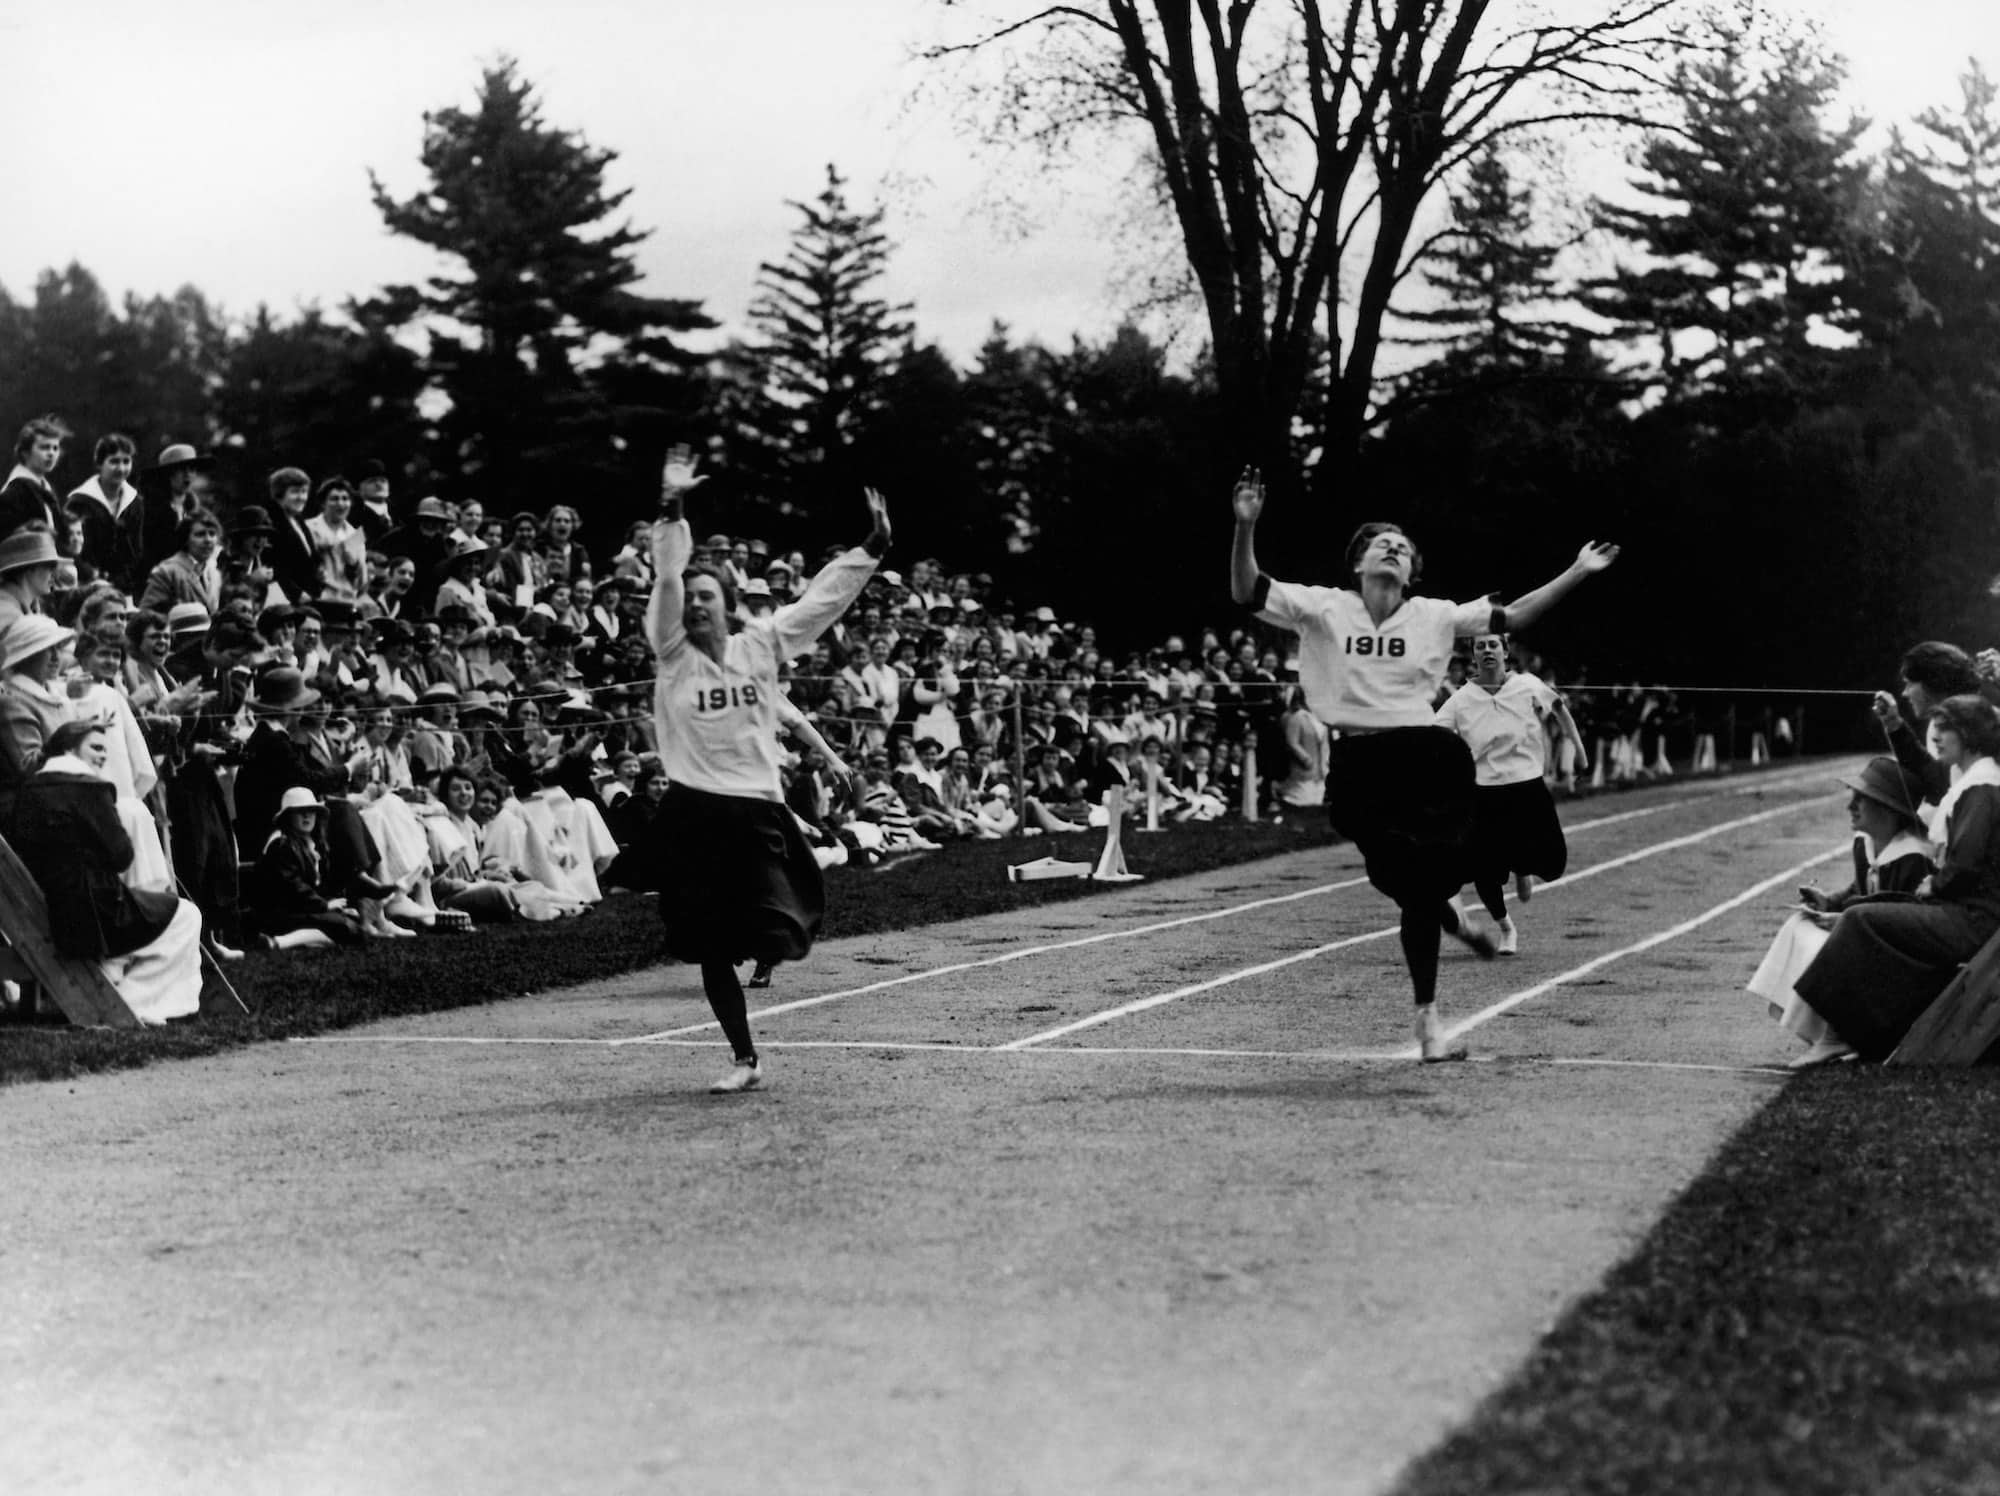 Historical black and white photo of two people wearing white sweatshirts with 1918 and 1919 imprinted on them, sprinting across the finish line of a dirt track with their hands in the air, while crowds of people seated at the sides of the track watch and cheer.